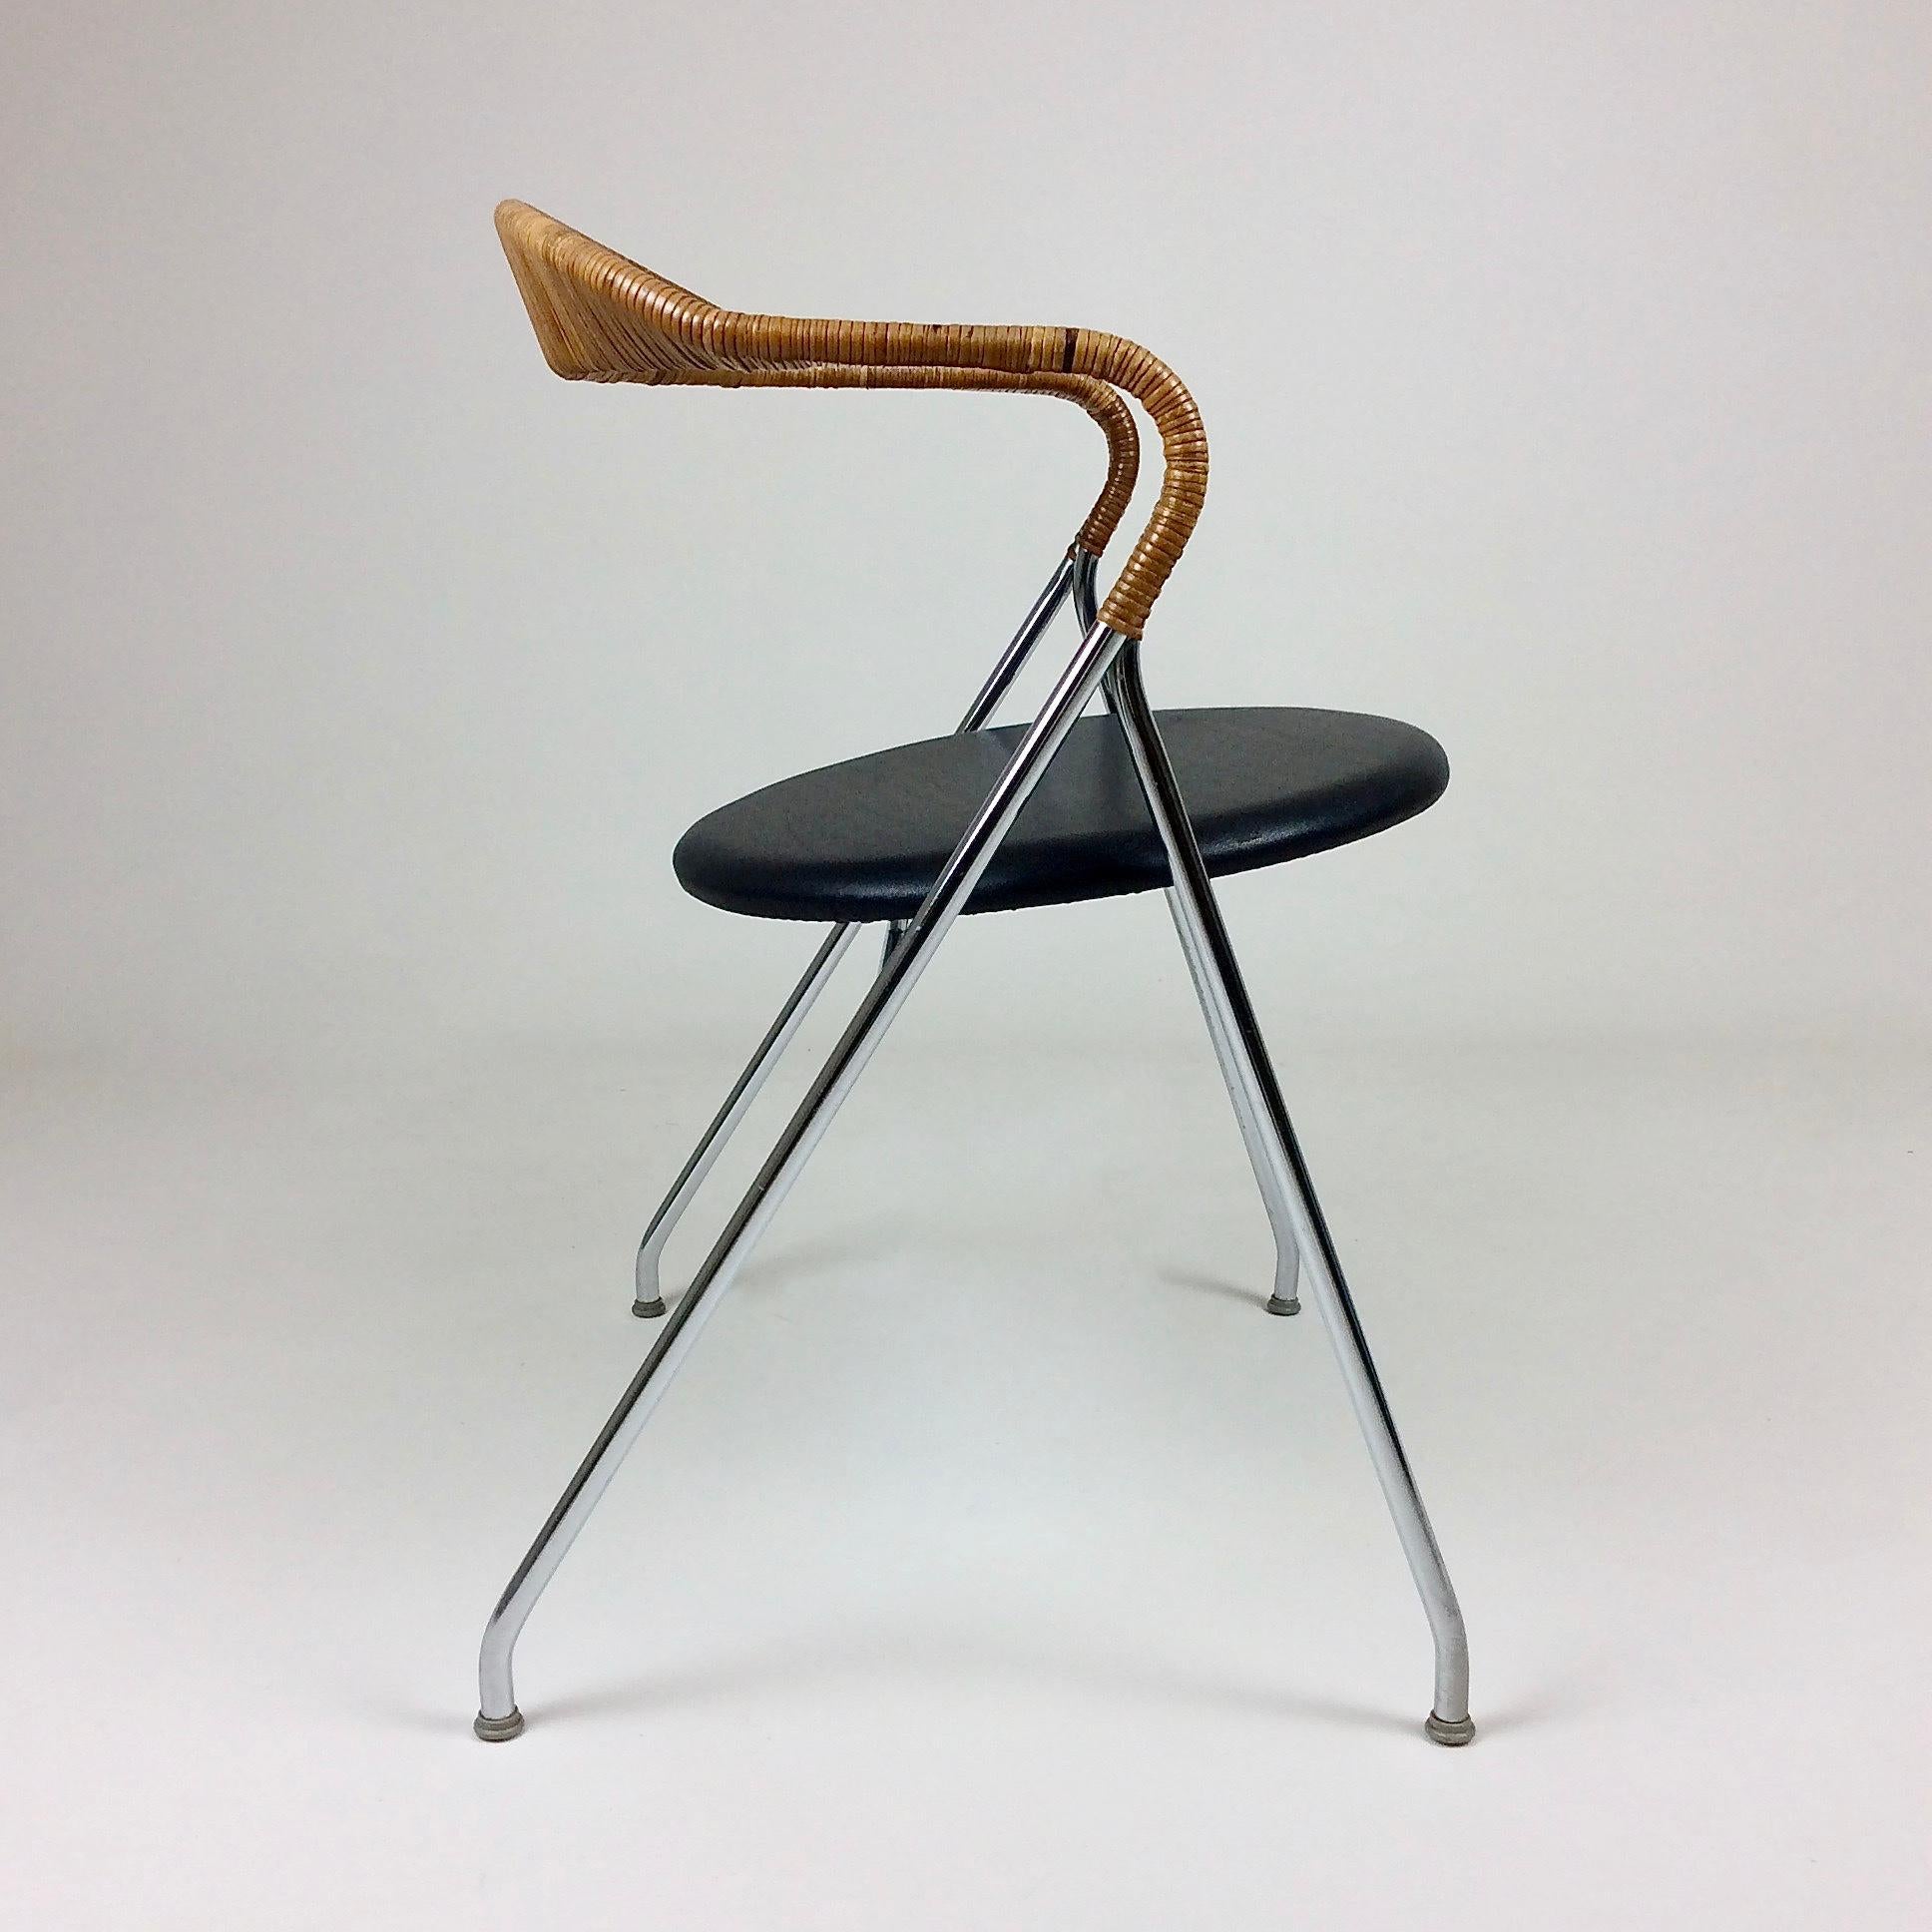 Nice Hans Eichenberger chair, Saffa HE-103 model for Dietriker, 1955, Switzerland.
Chromed tubular steel, black leather seating and cane backrest.
Dimensions: 73 cm H, 57 cm W, 50 cm D, seat height 44 cm.
All purchases are covered by our buyer